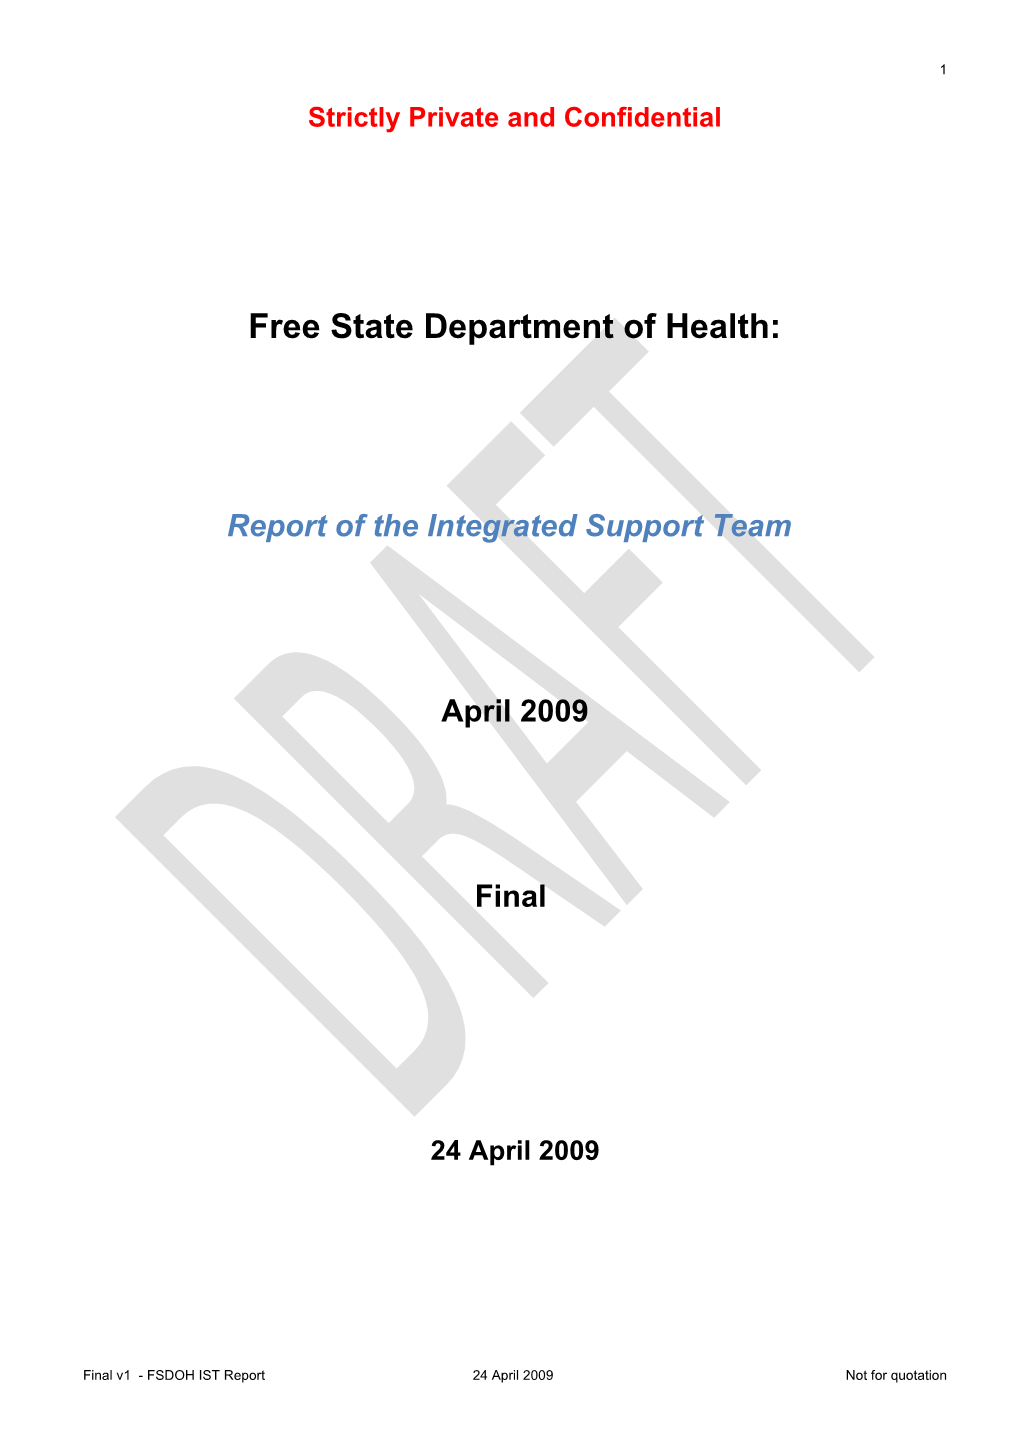 Free State DOH Report Final Draft